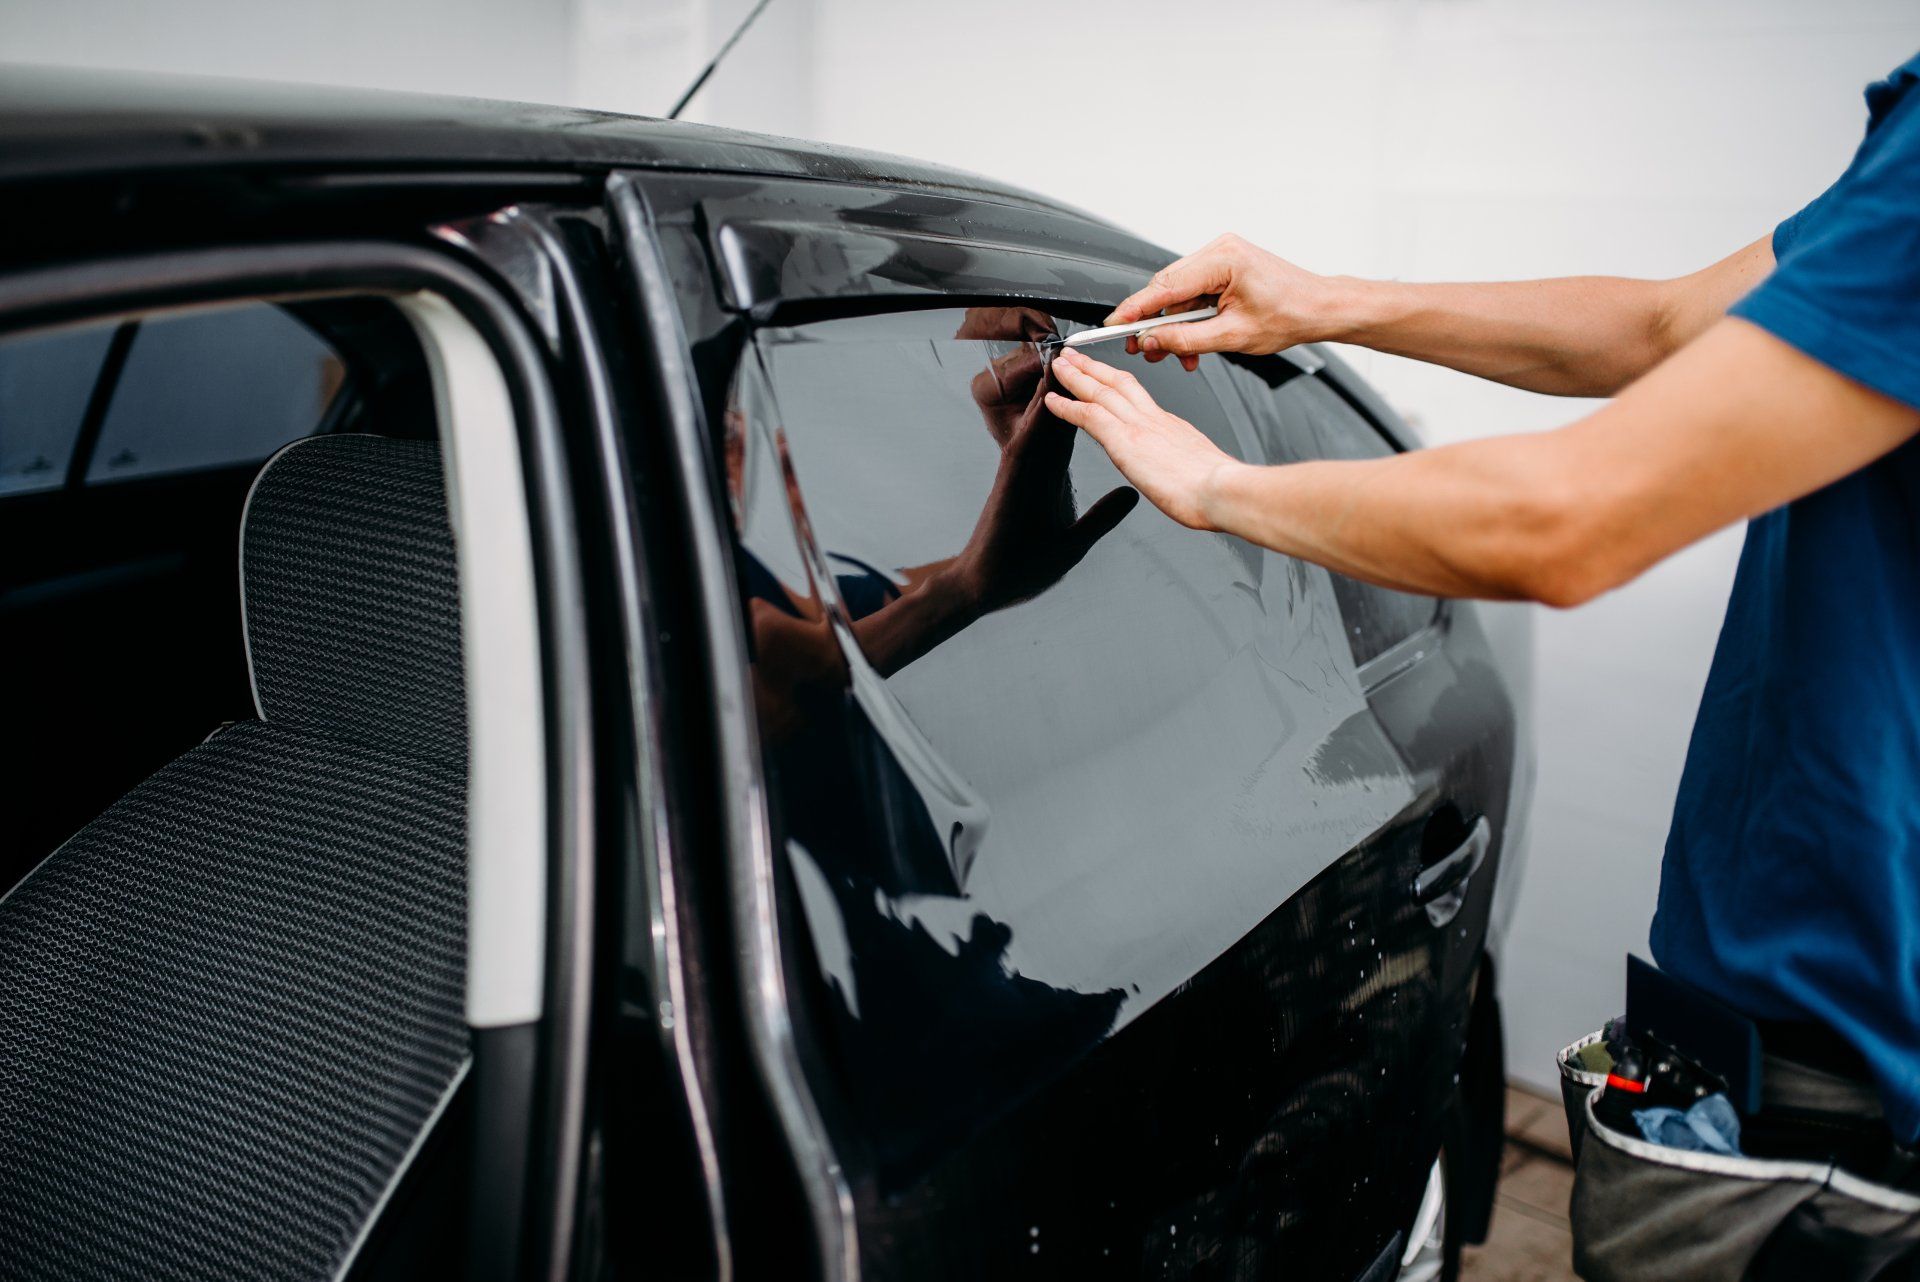  How To Take Tint Off Car Windows